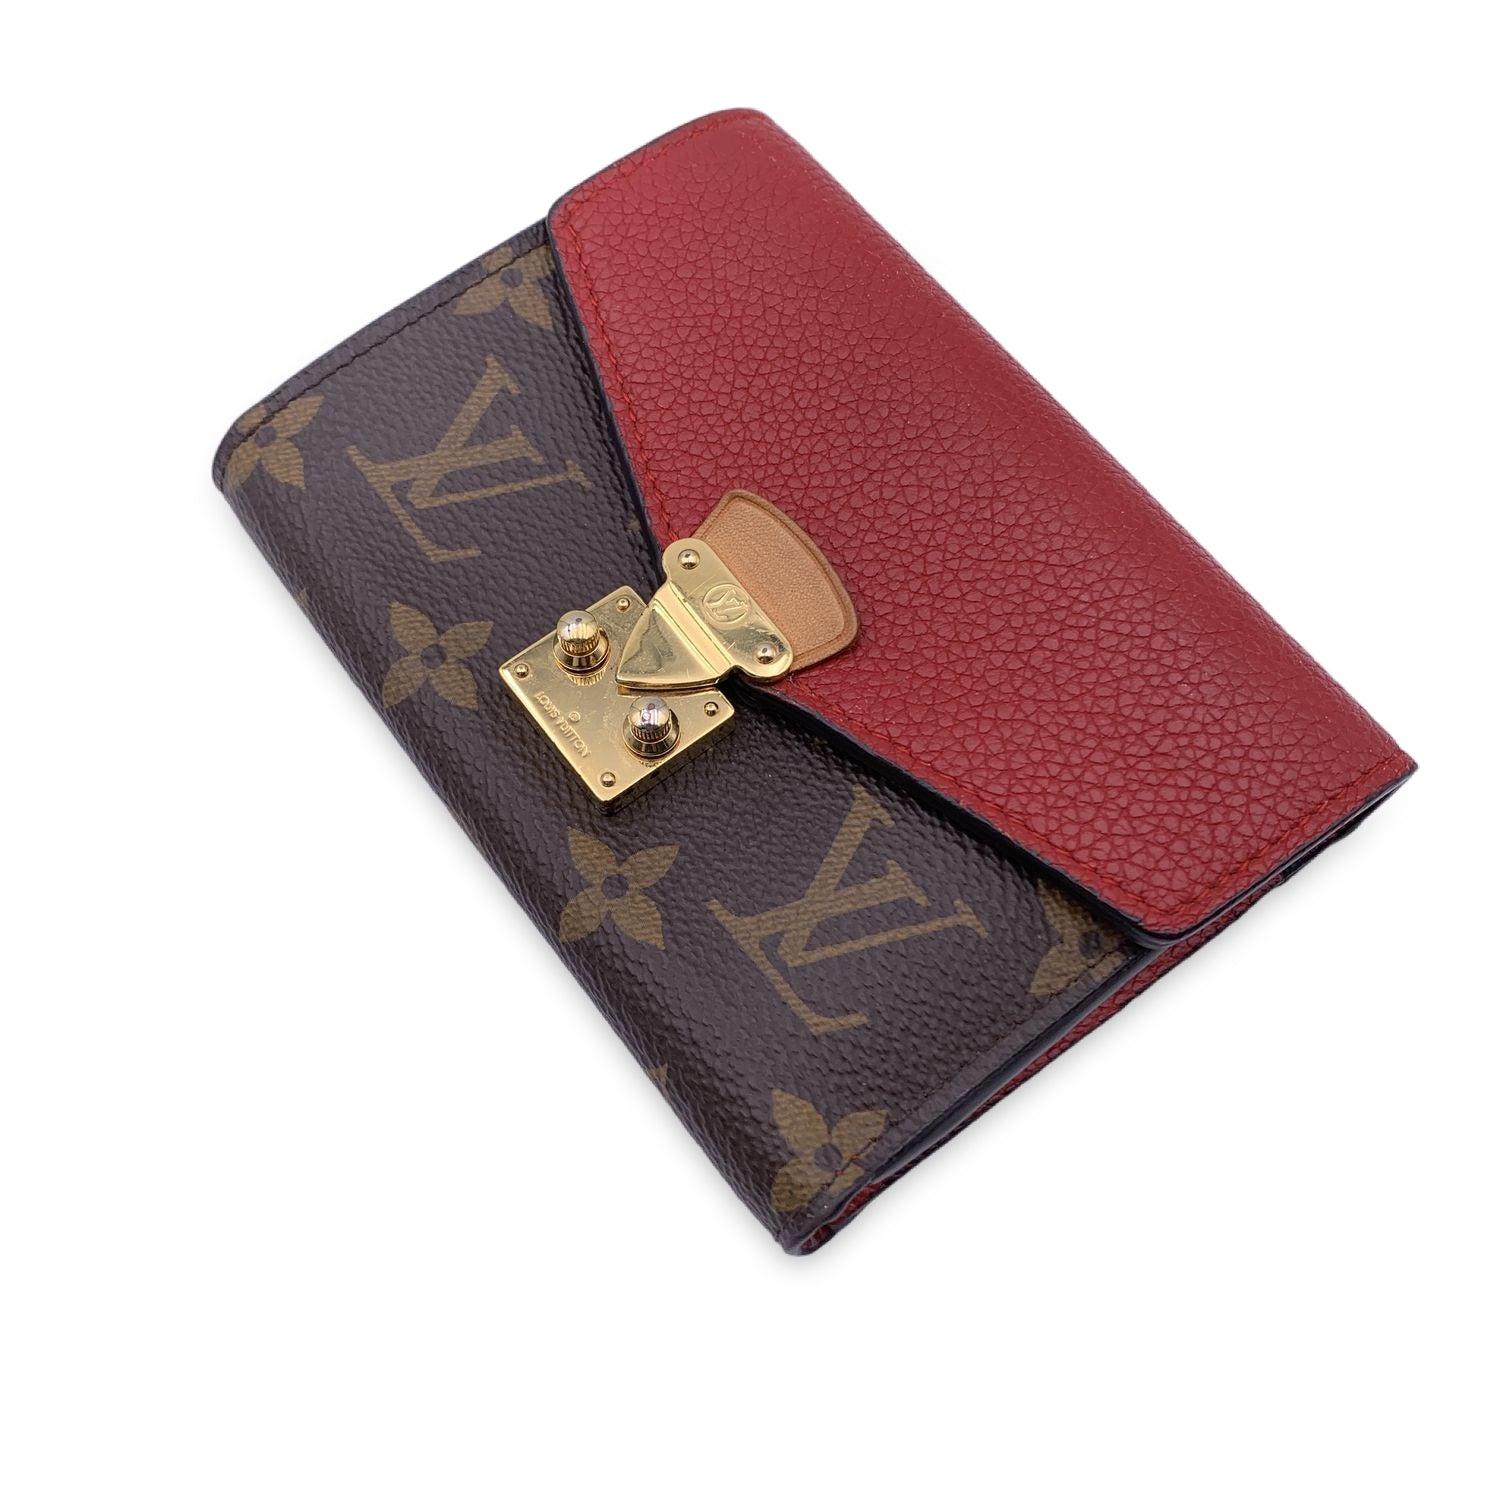 This beautiful Bag will come with a Certificate of Authenticity provided by Entrupy. The certificate will be provided at no further cost Louis Vuitton 'Pallas NM' compact wallet, in brown monogram canvas. It features a frontal flap in red calf